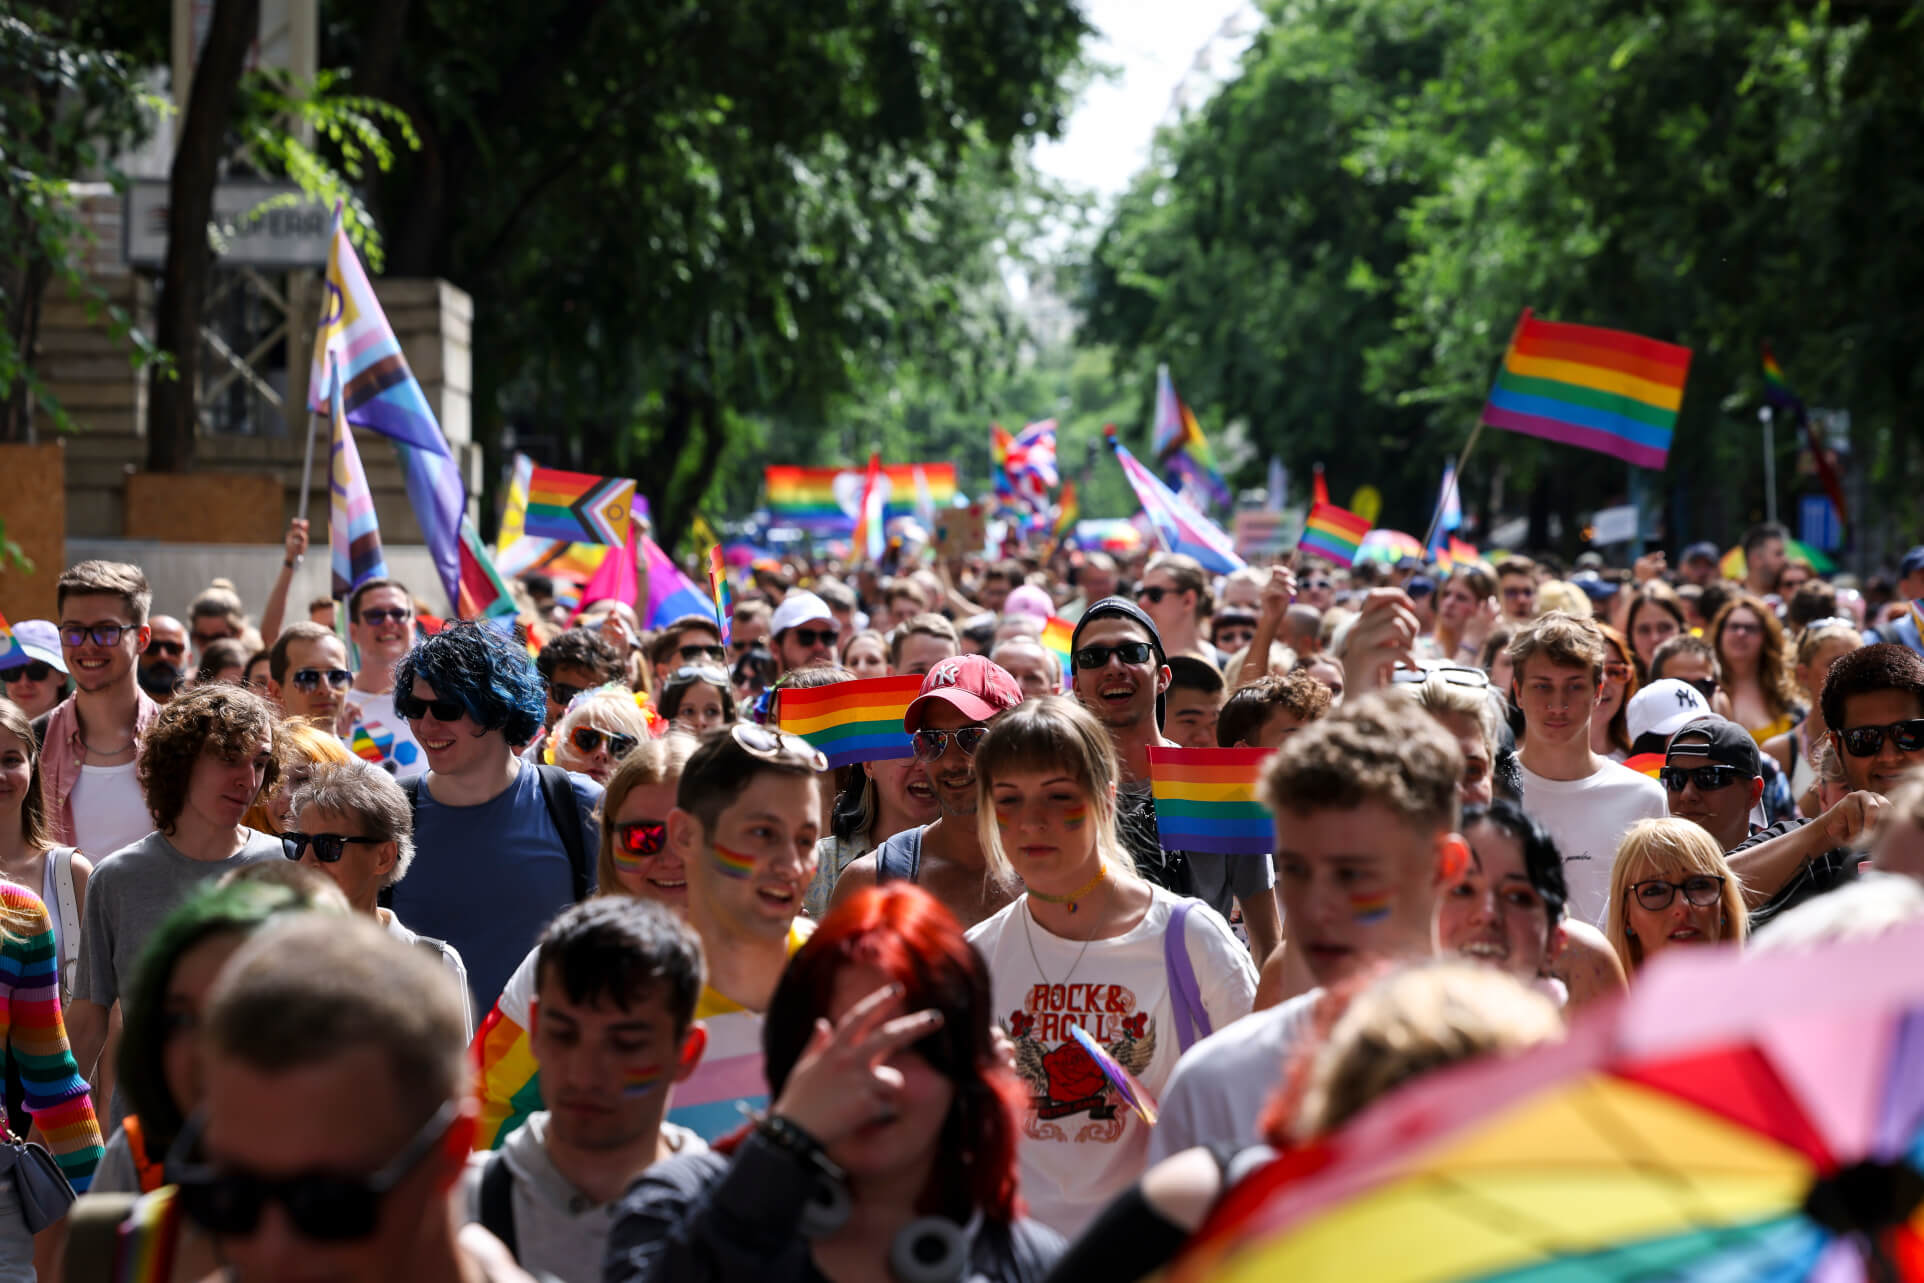 Watch: Pride March Held in Budapest, Amid Counter-Demos